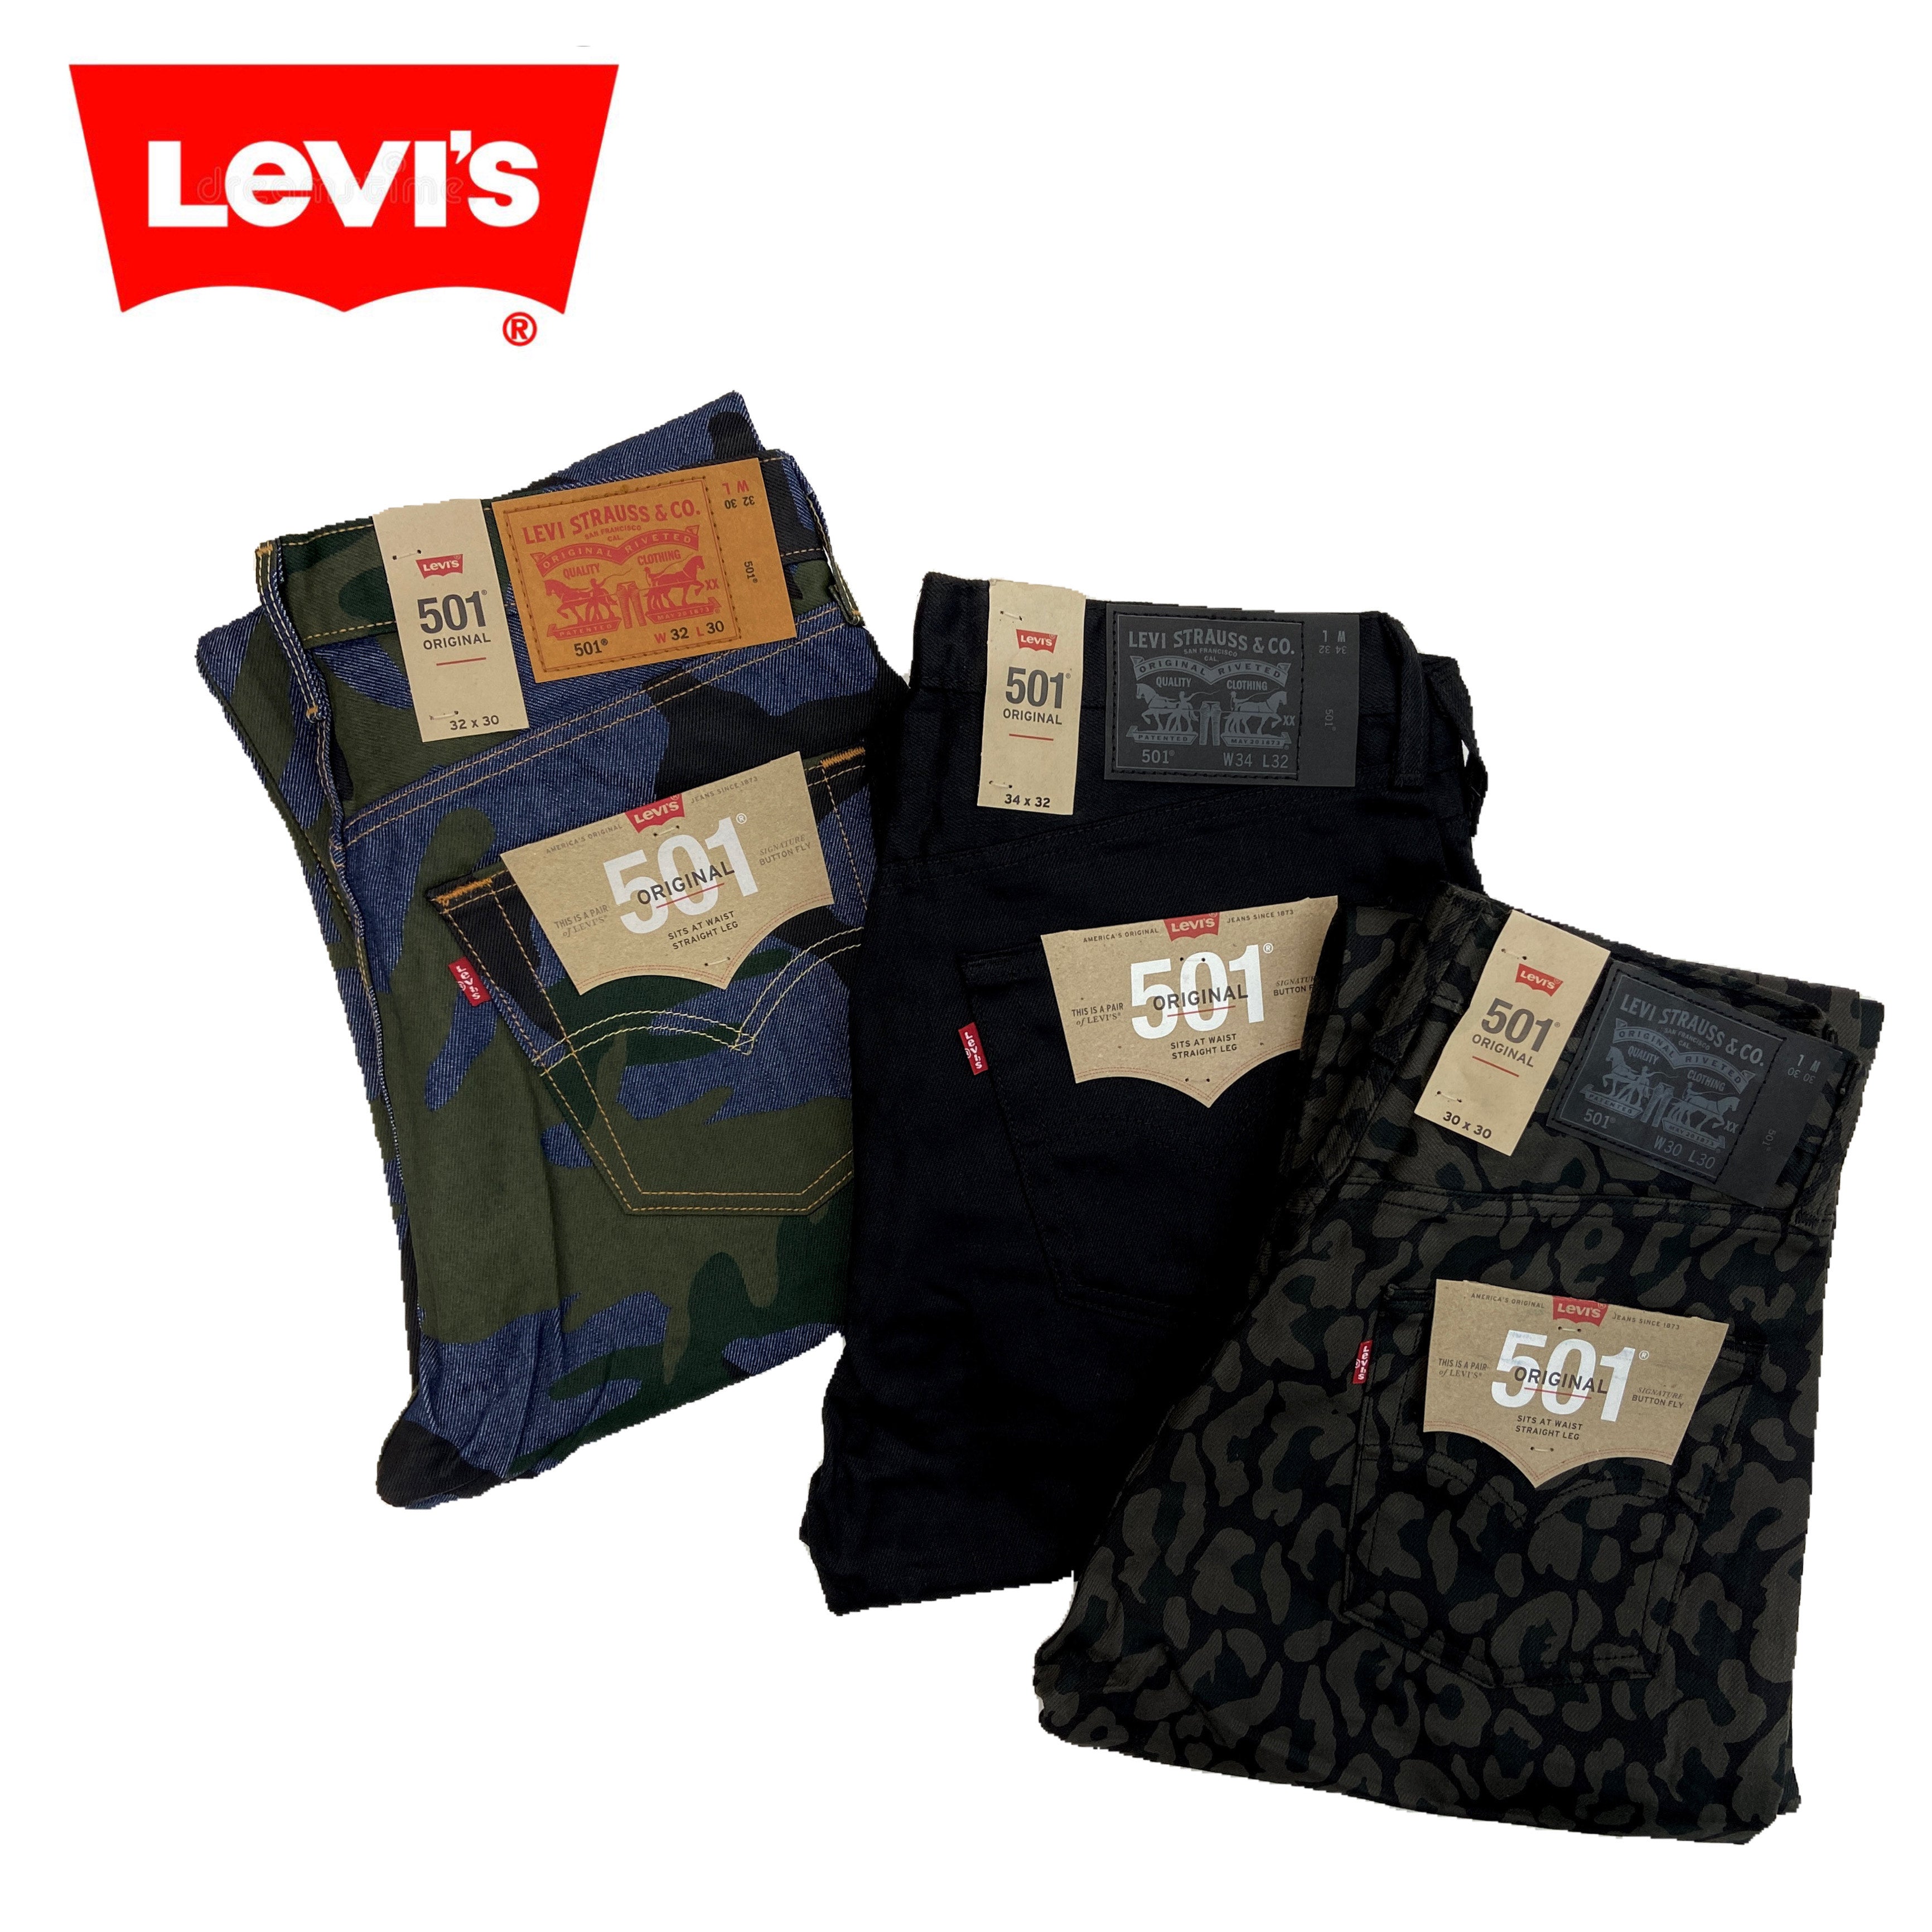 Levi's 501 Shrink-to-fit Size 30 - 44